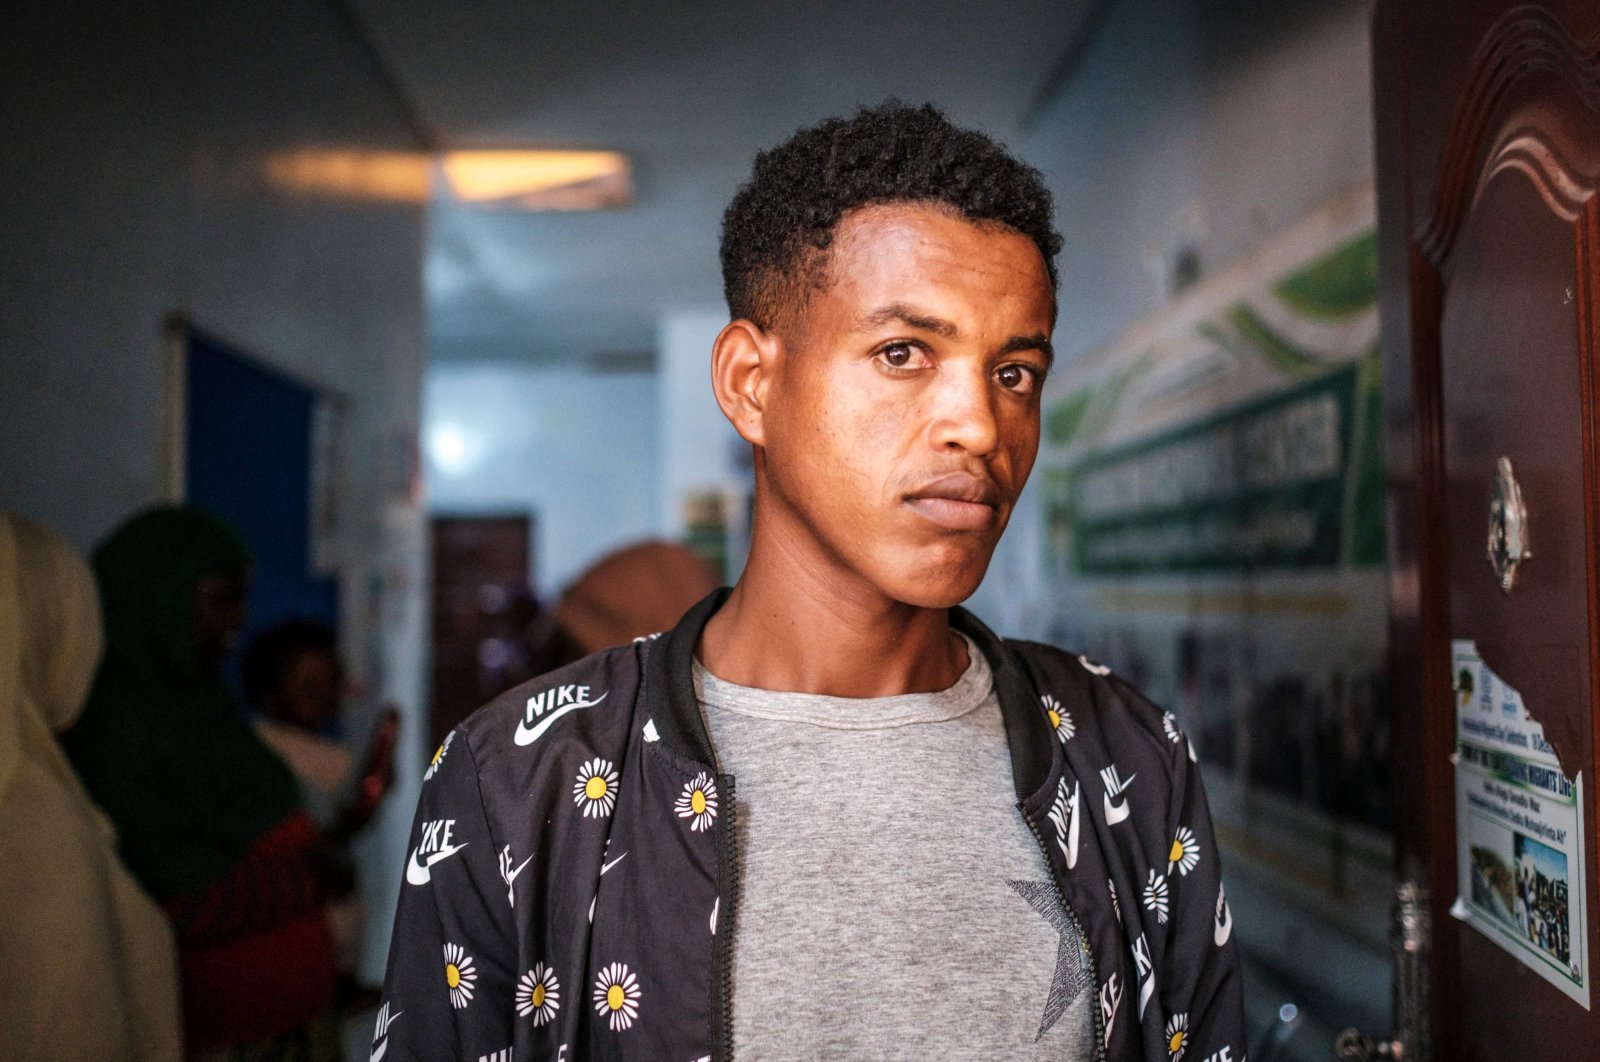 Fentahun Derebe, a 19-year-old Ethiopian migrant, is photographed at an International Organization for Migration (IOM) center in Hargeisa, Somalia, Sept. 19, 2021. (AFP Photo)